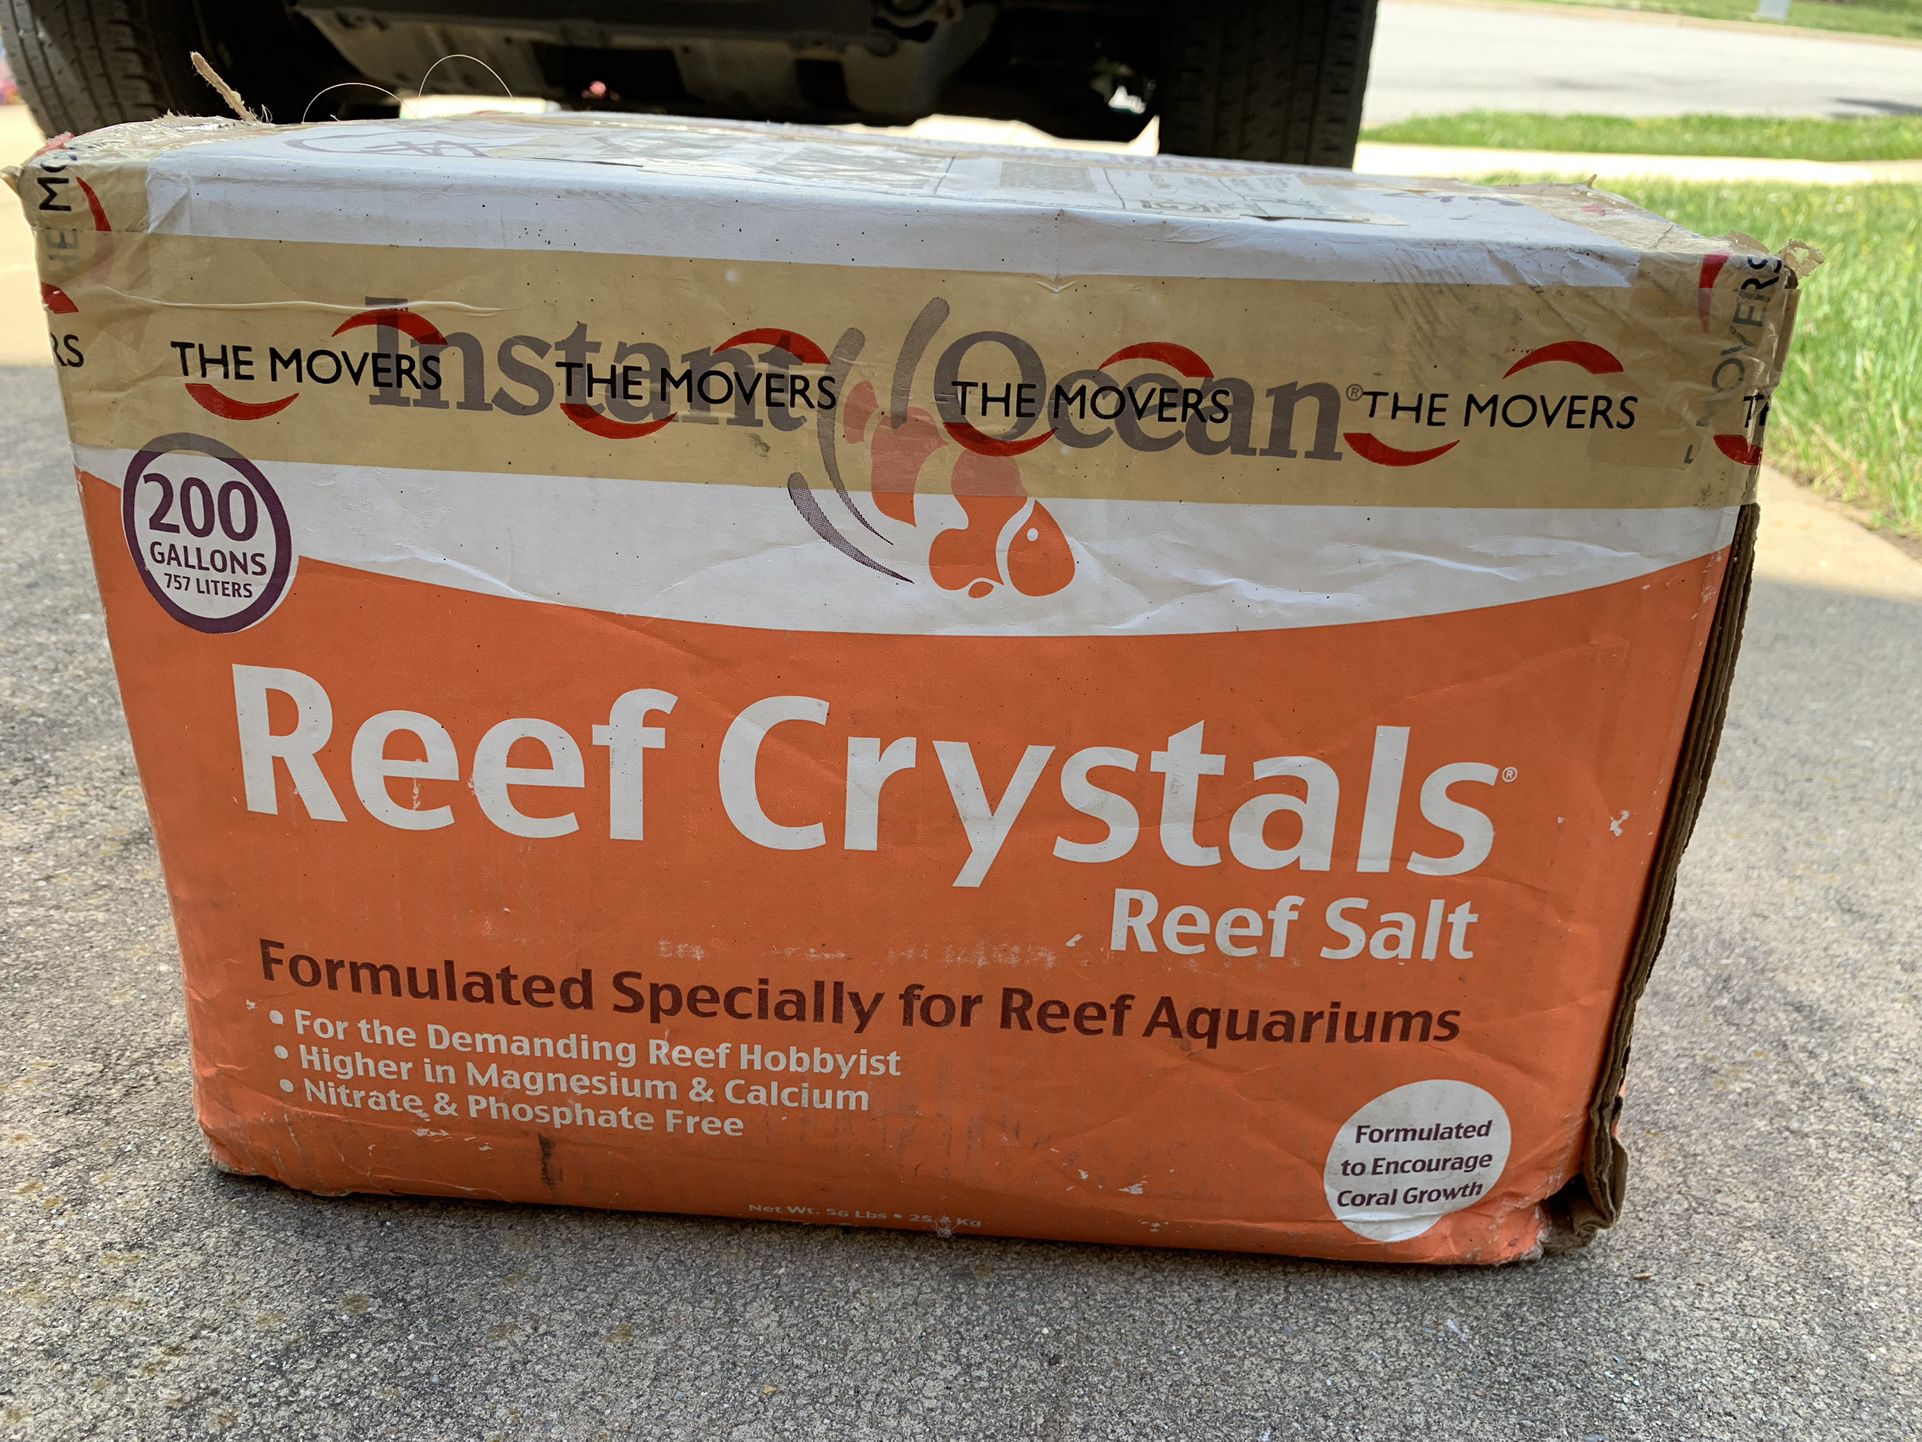 NEW Box Of Reef Crystals reef salt (200 Gallons)